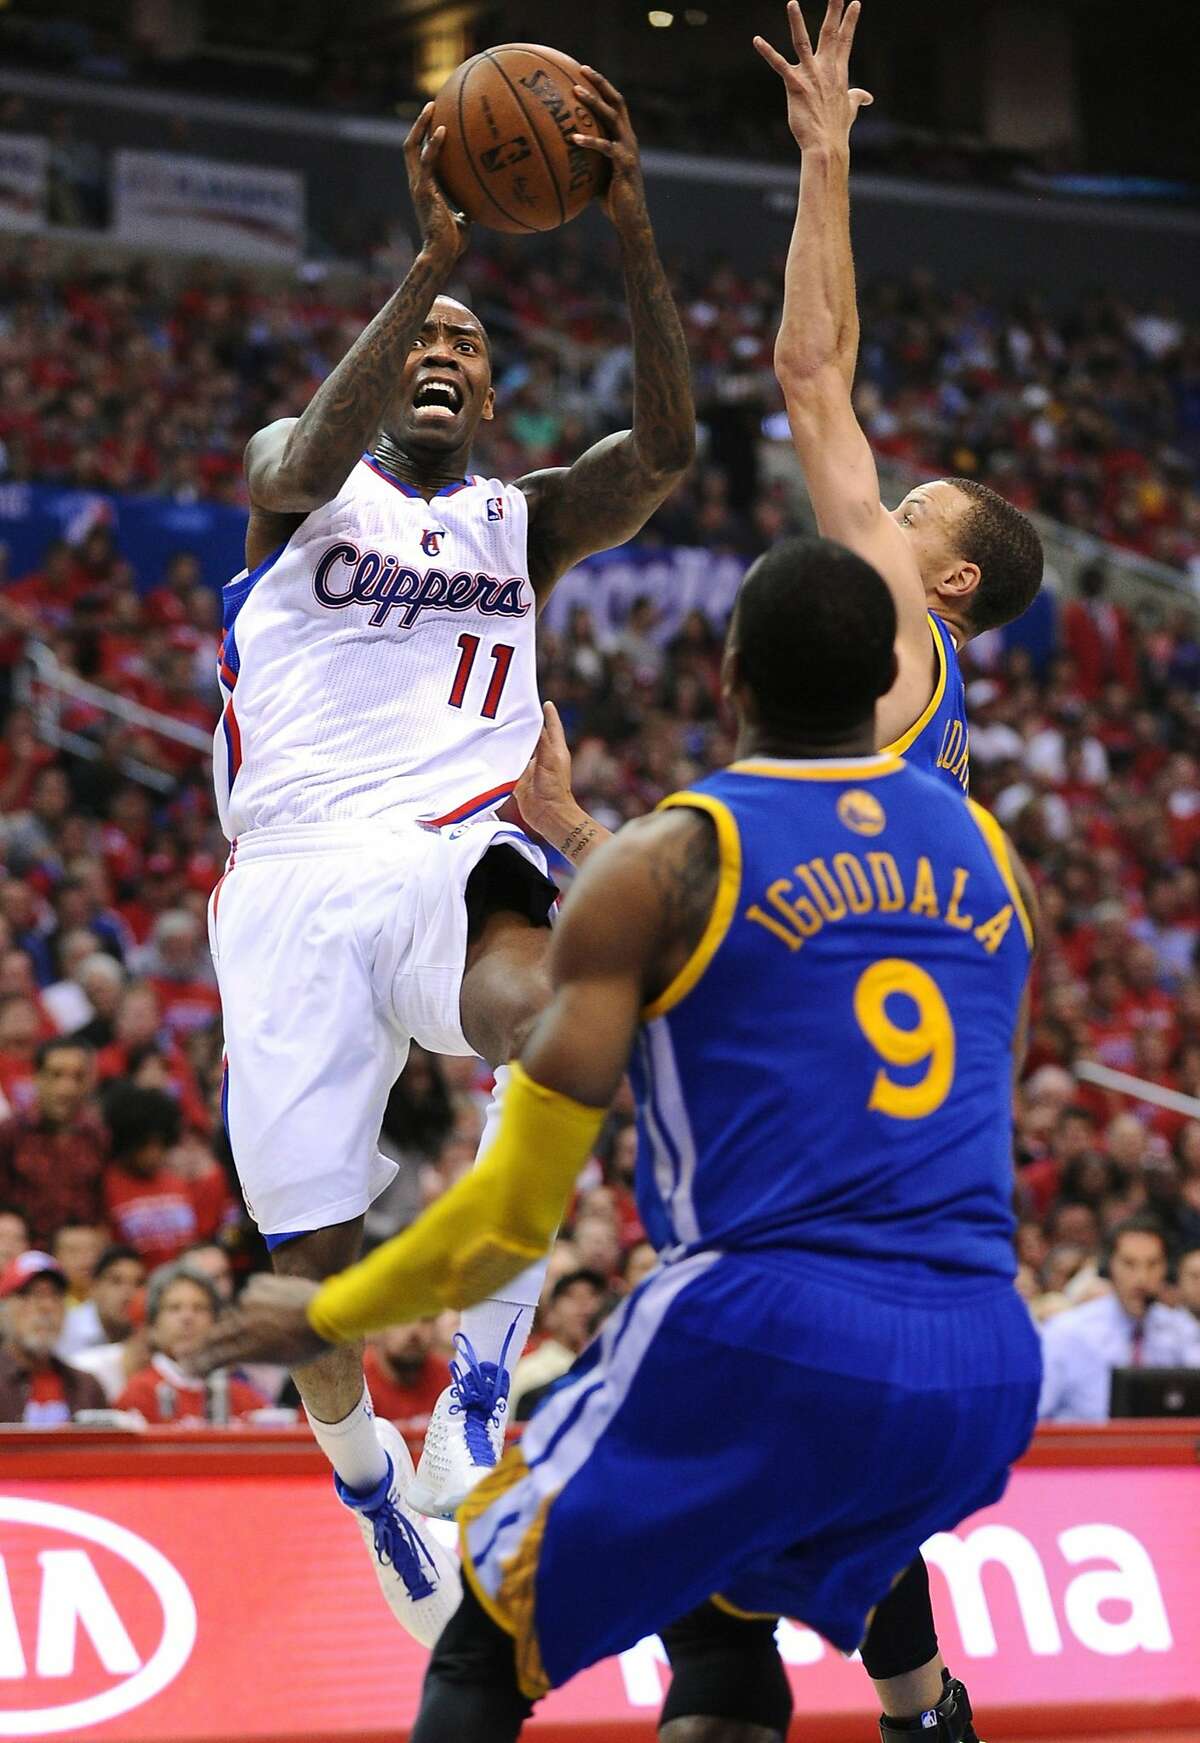 The Los Angeles Clippers' Jamal Crawford (11) drives to the basket against Golden State Warriors defenders Stephen Curry and Andre Iguodala (9) during Game 2 of the NBA Western Conference quarterfinals at the Staples Center in Los Angeles, Monday, April 21, 2014. (Wally Skalij/Los Angeles Times/MCT)